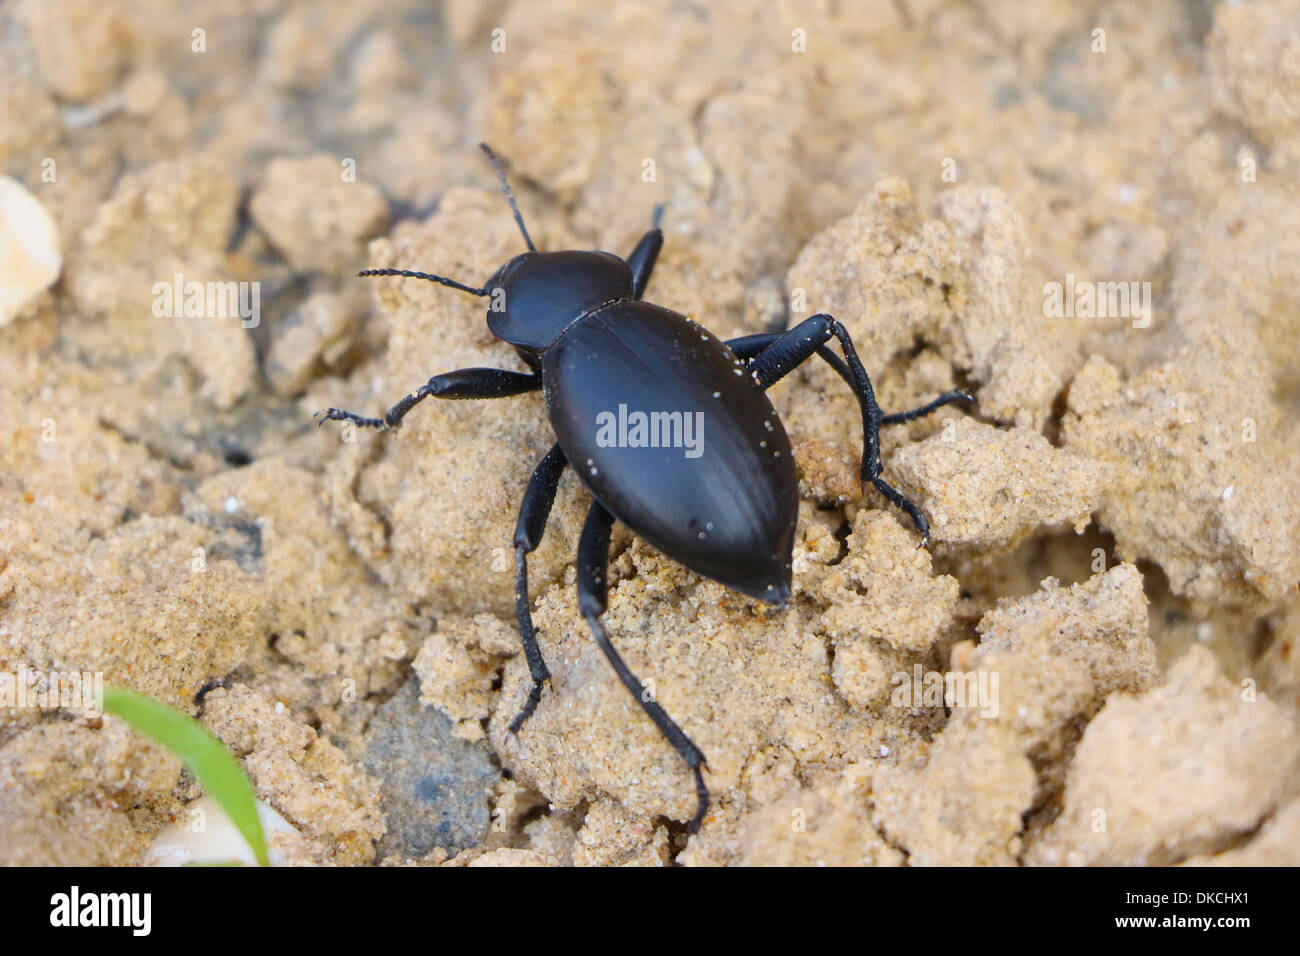 Foto macro dung beetle nell'ambiente naturale Foto Stock